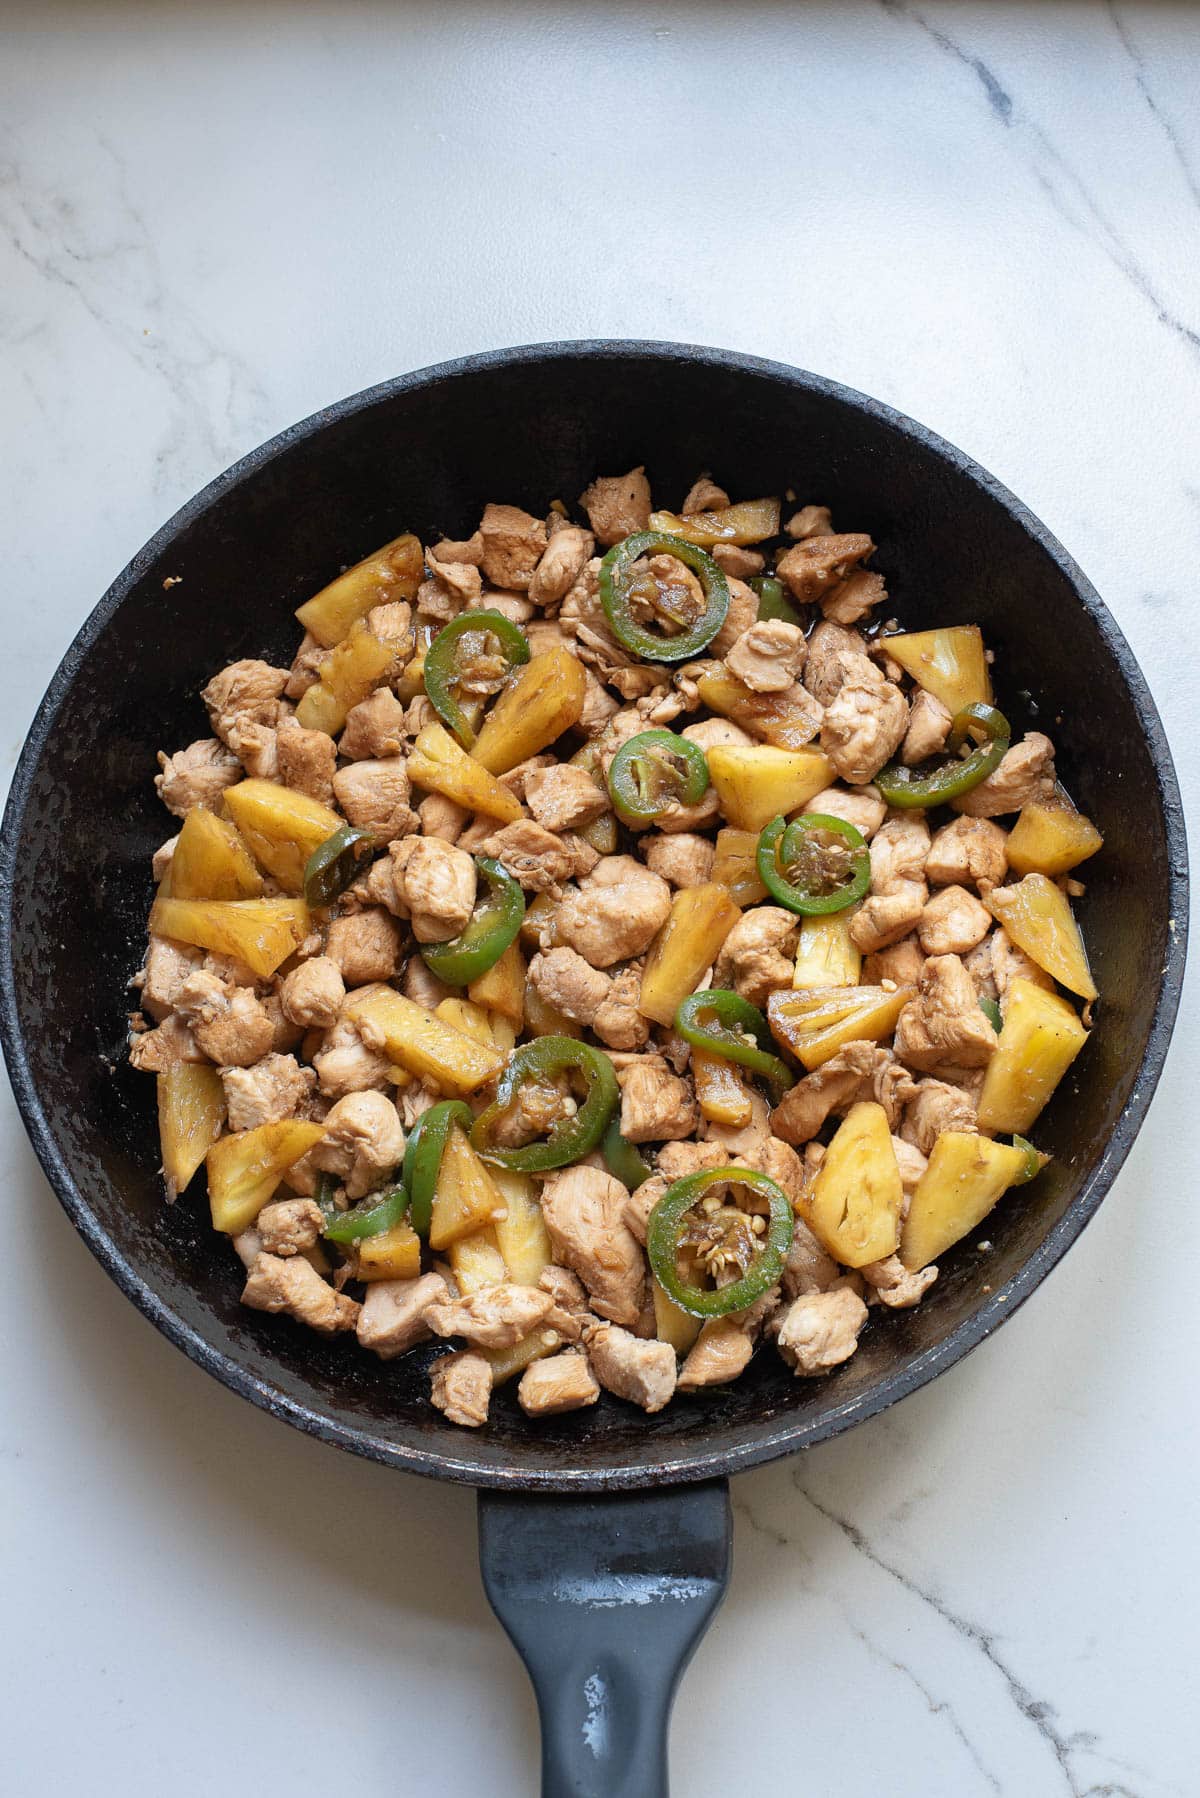 Chunks of chicken, pineapple, and jalapenos cooking in a cast iron pan.